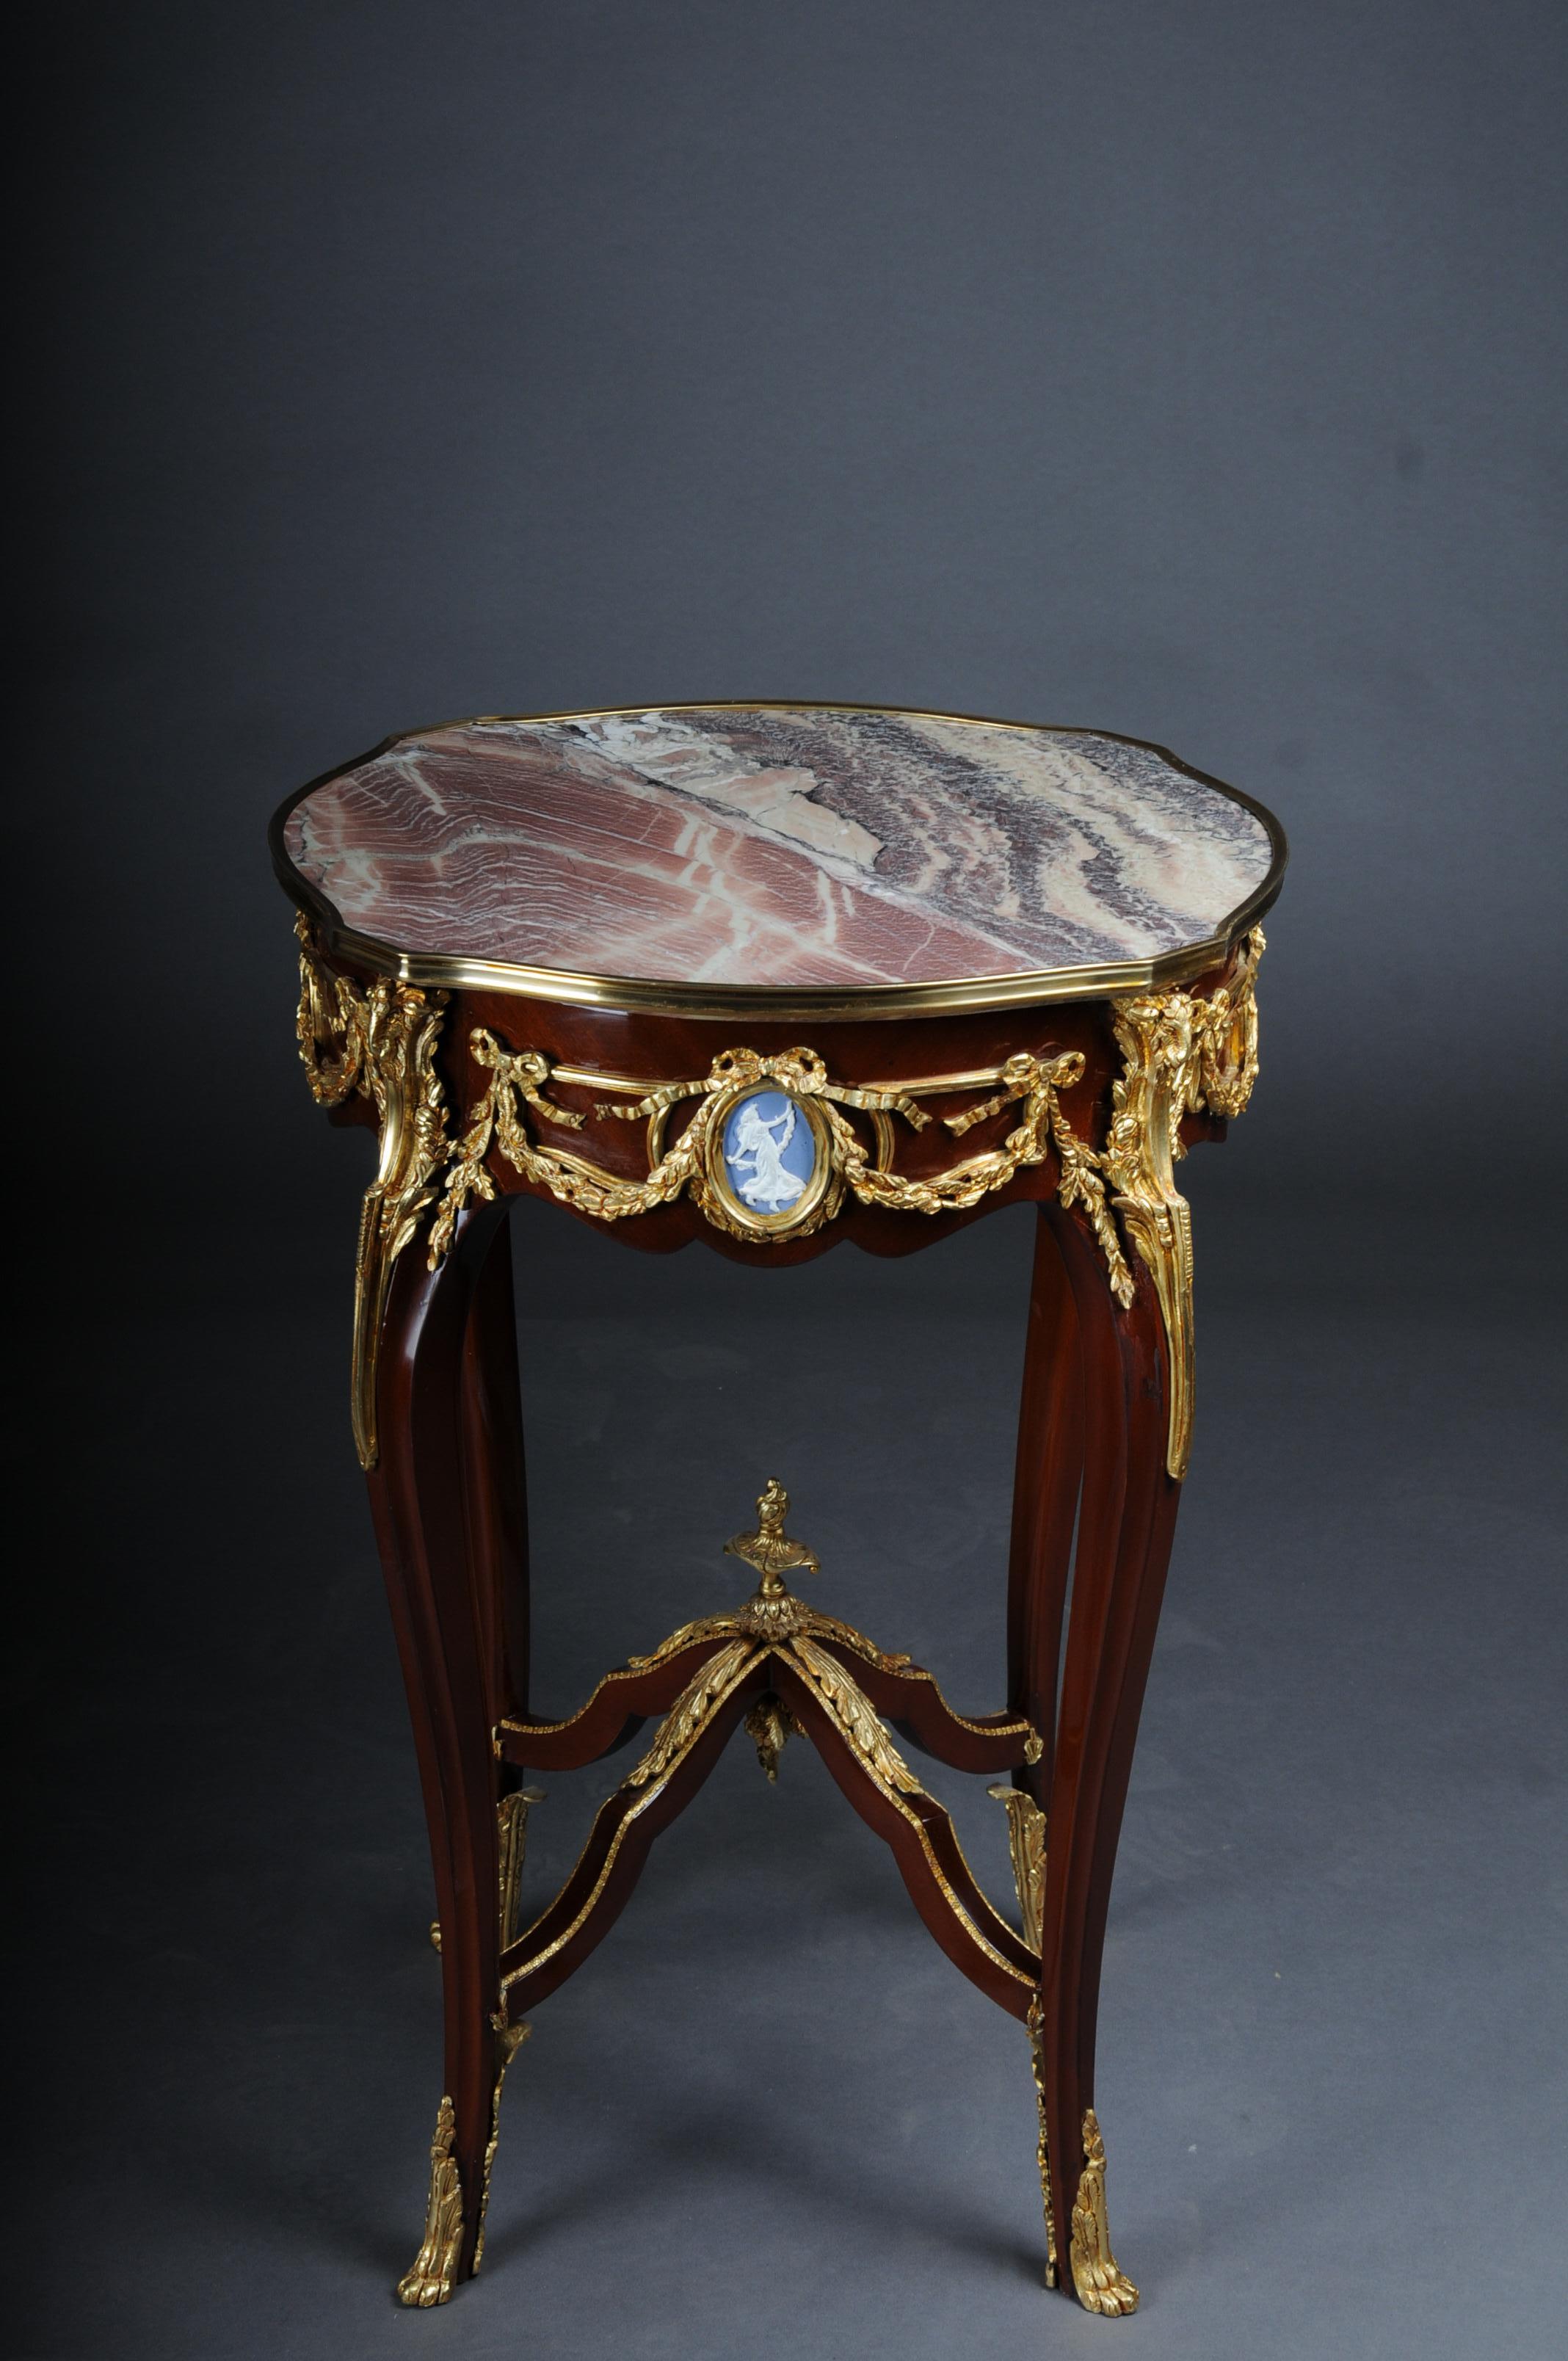 20th Century Grandiose side table with bronze Louis XV marble beech wood

Body made of solid beech wood with rich brass bronze decorations, gilded. Round marbled cover plate with gilded frame. The marble top has a stunning mottle. Each frame strip